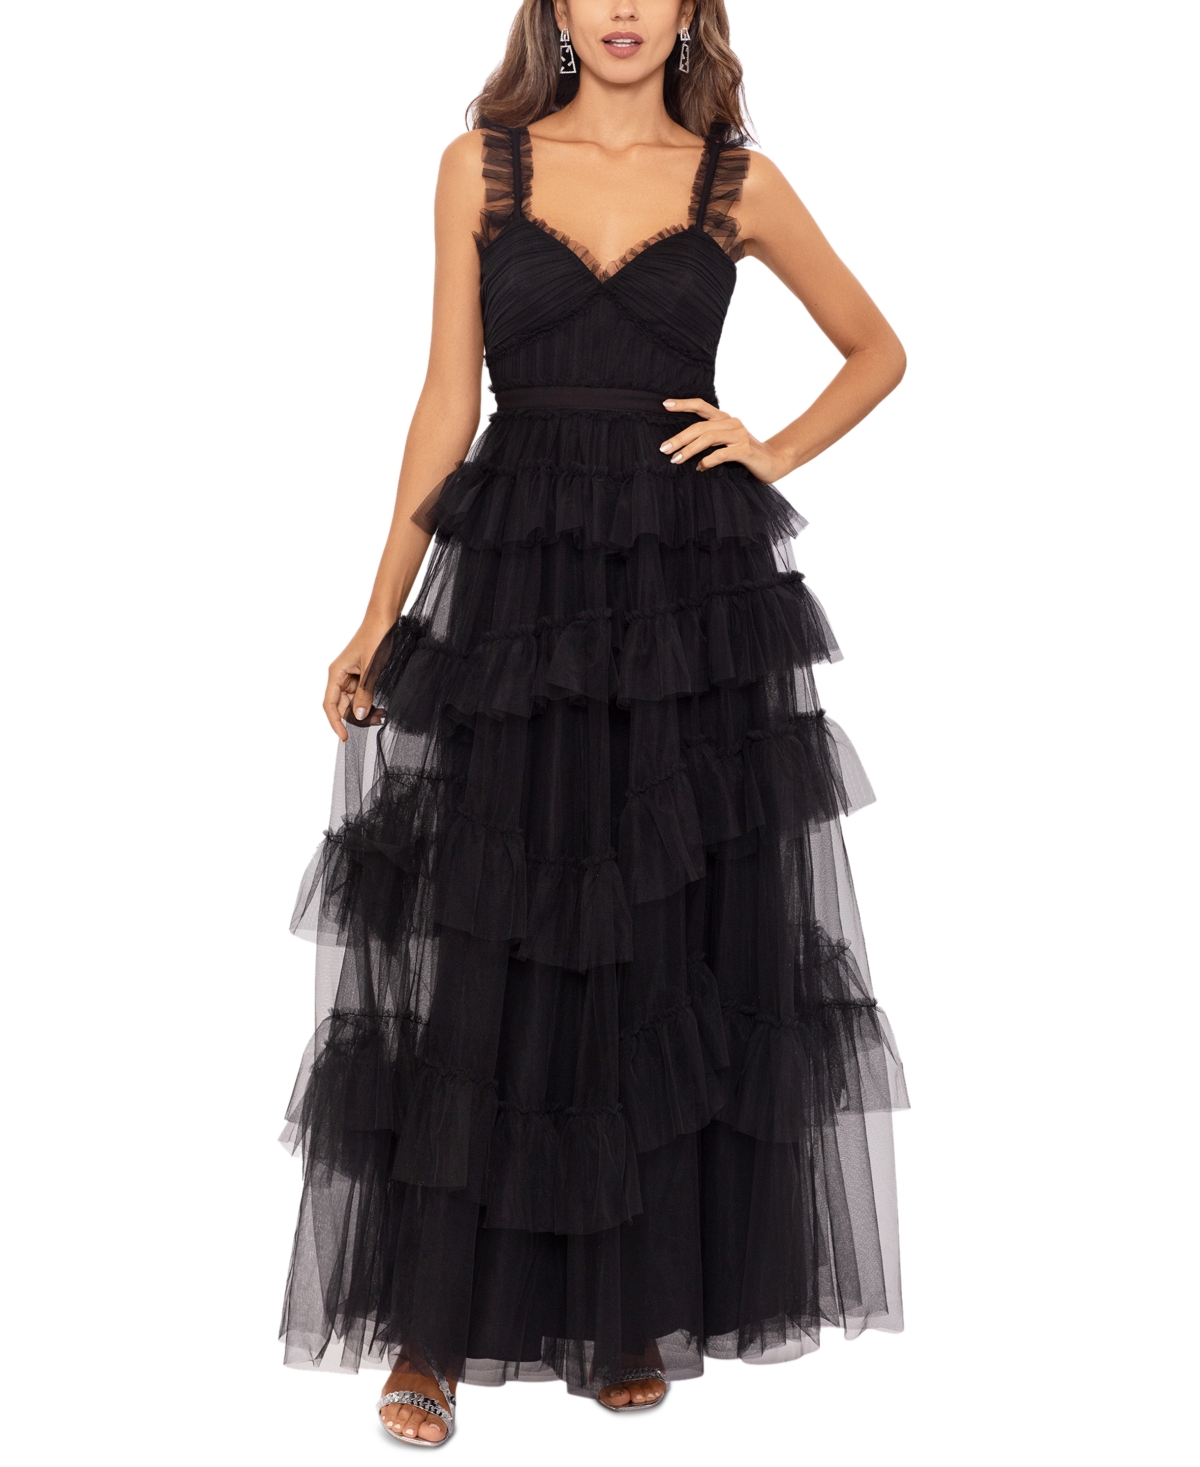 Vintage 1930s Formal, Party Dresses History Betsy  Adam Womens Ruffled Tiered Gown - Black $299.00 AT vintagedancer.com